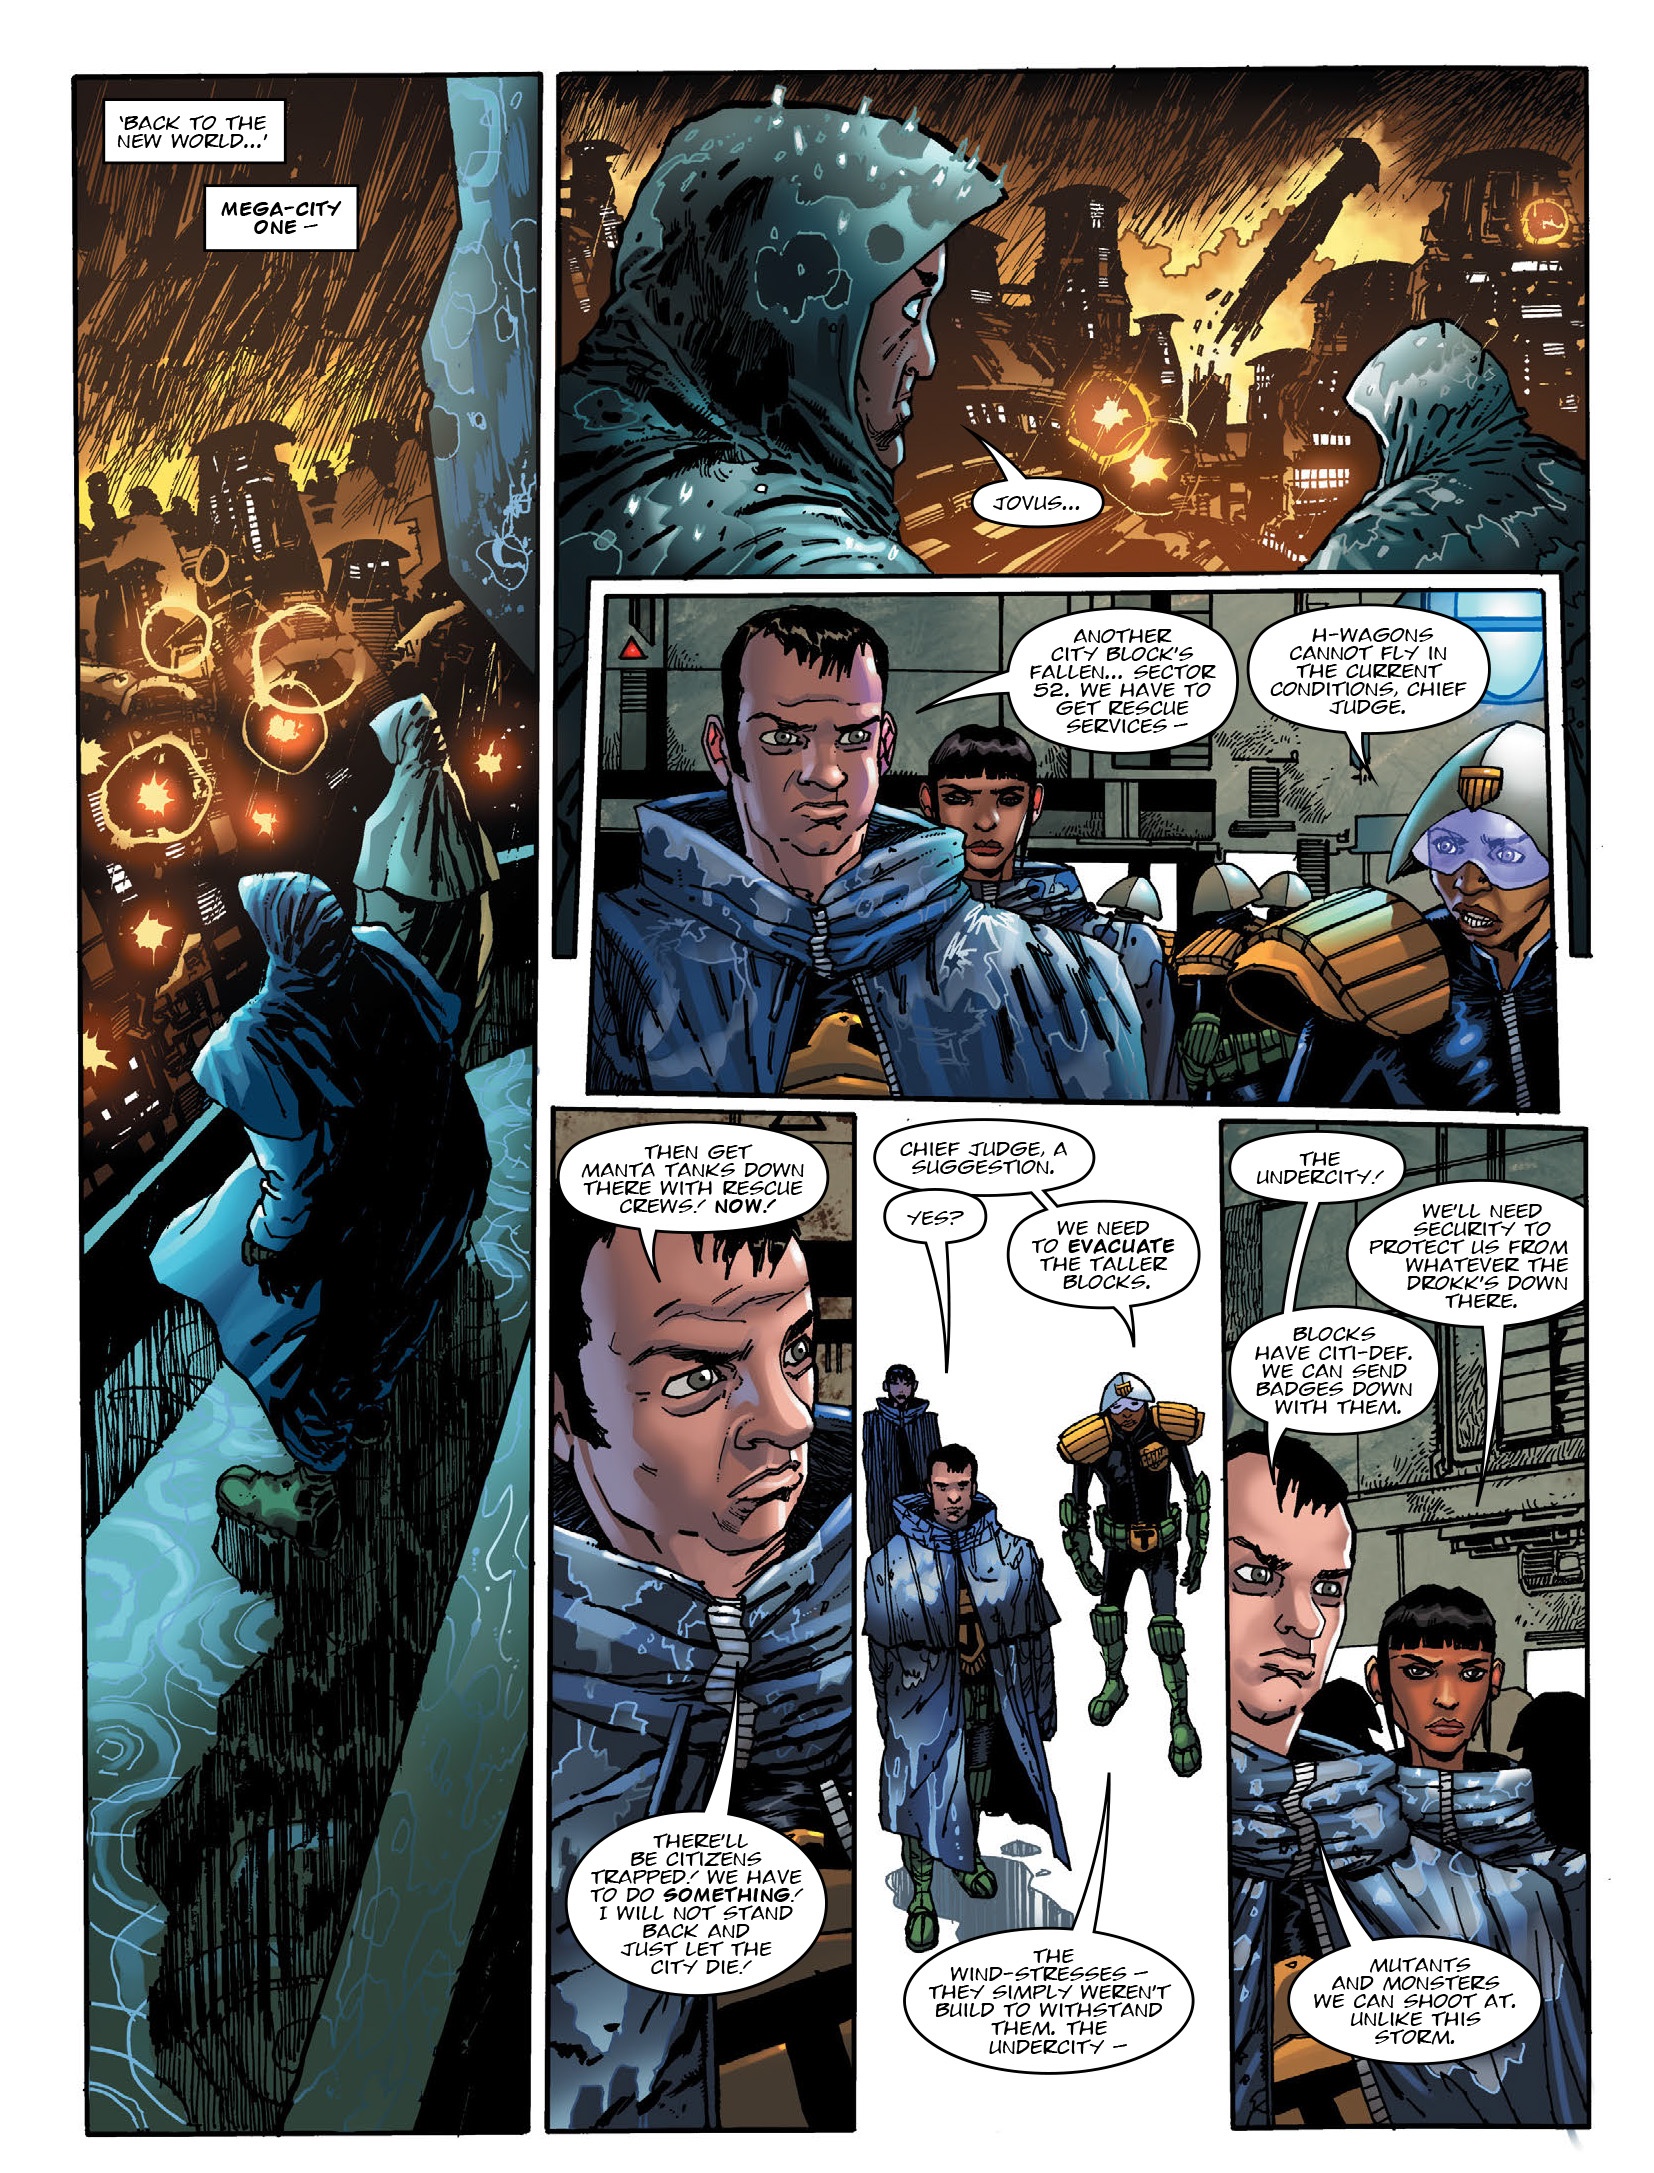 2000 AD: Chapter 2191 - Page 4